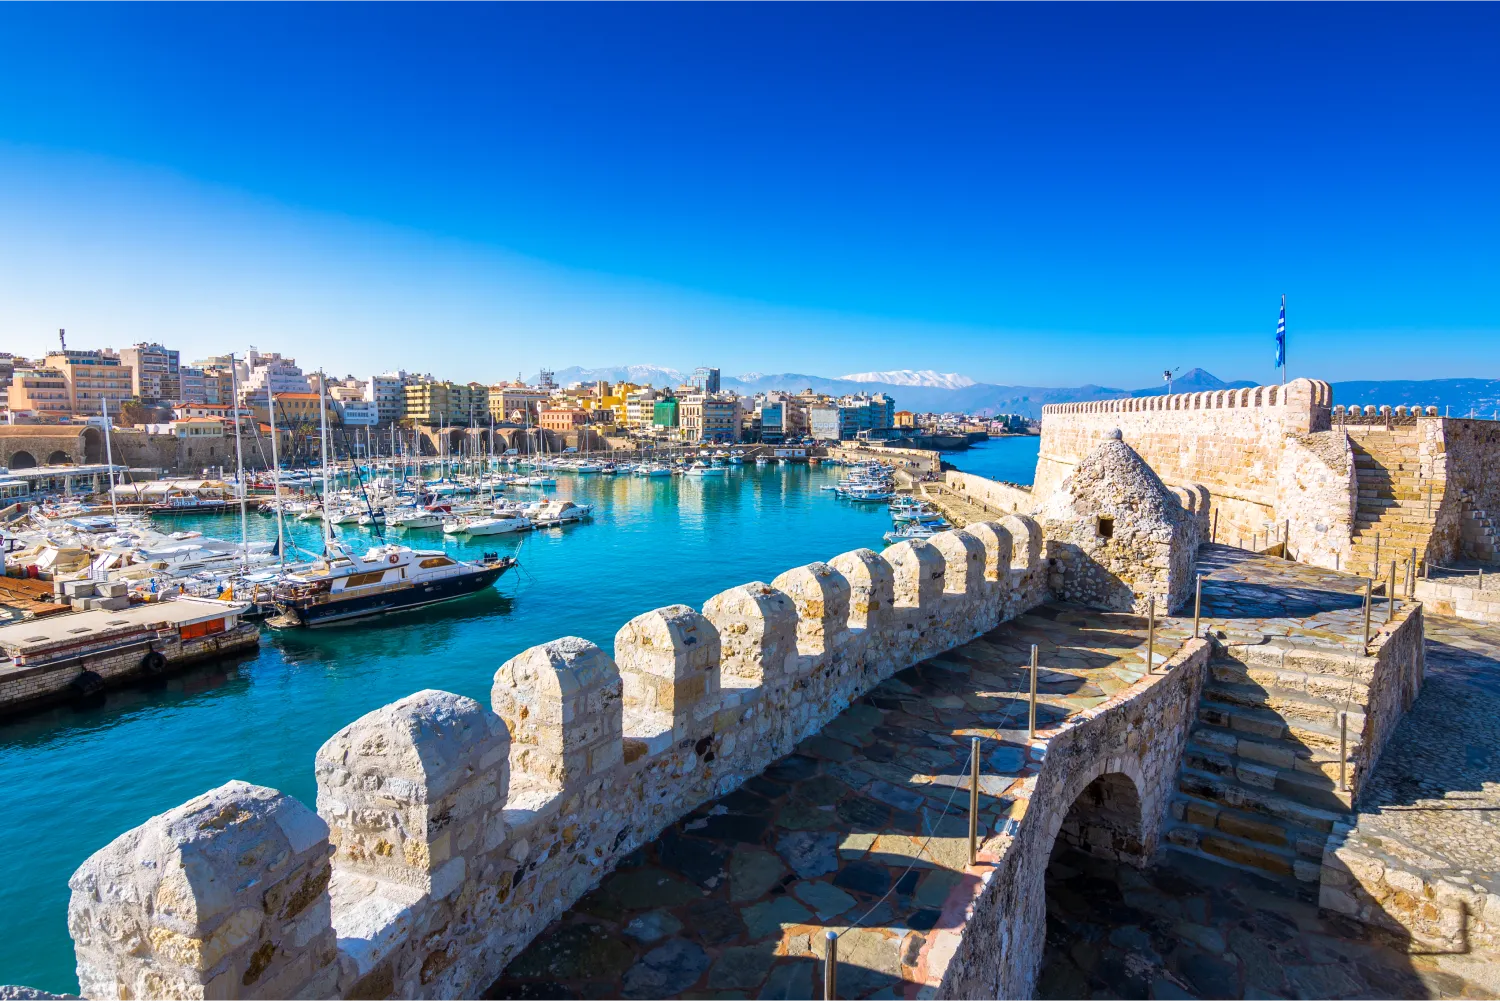 Heraklion Harbour With Old Venetian Fort Koule And Shipyards, Crete